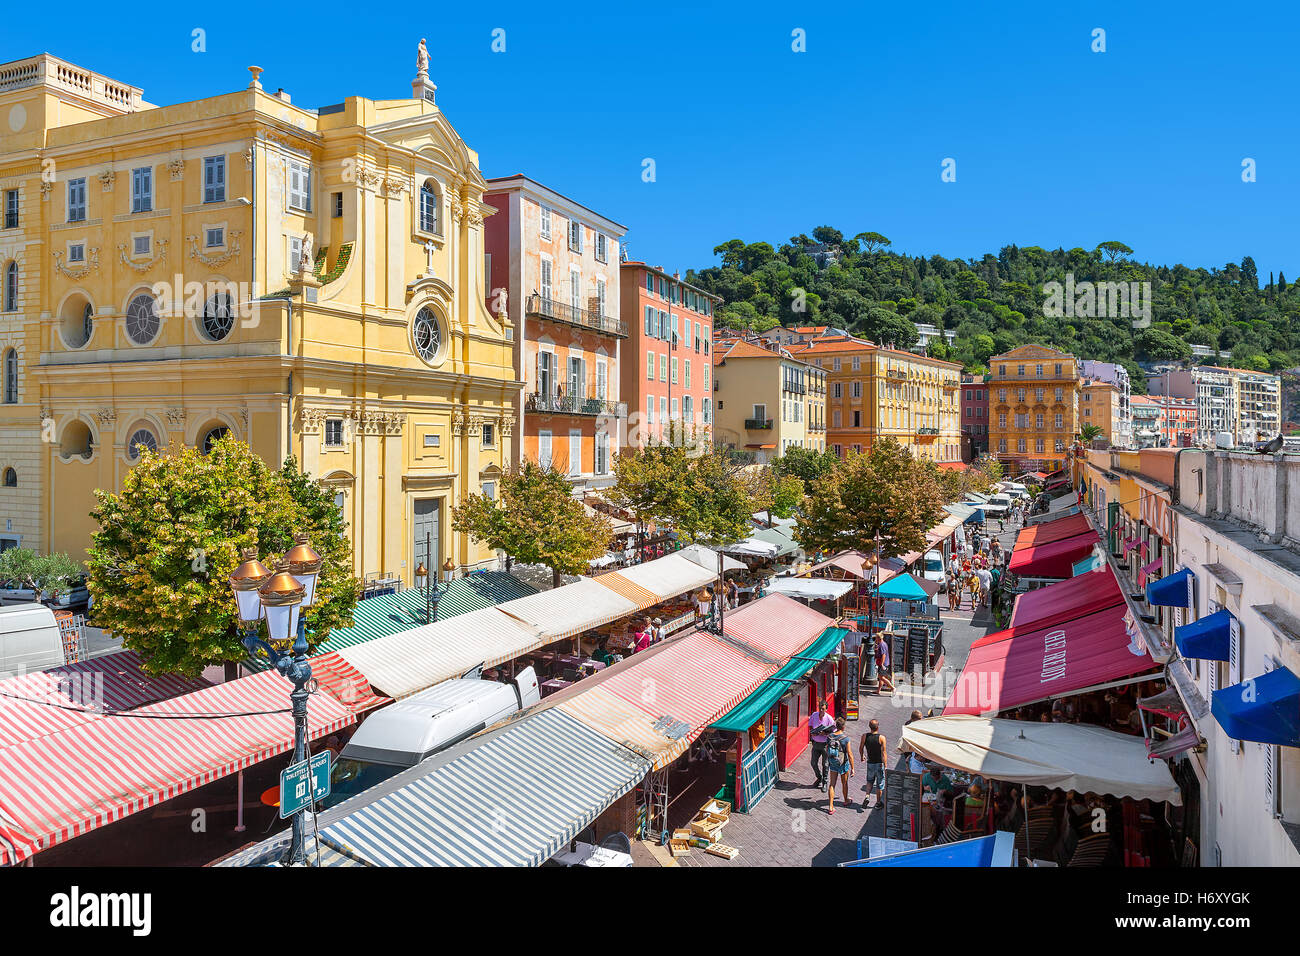 View of Cours Saleya - large pedestrian area famous for its flower, vegetable, spice and fish market in Nice, France. Stock Photo